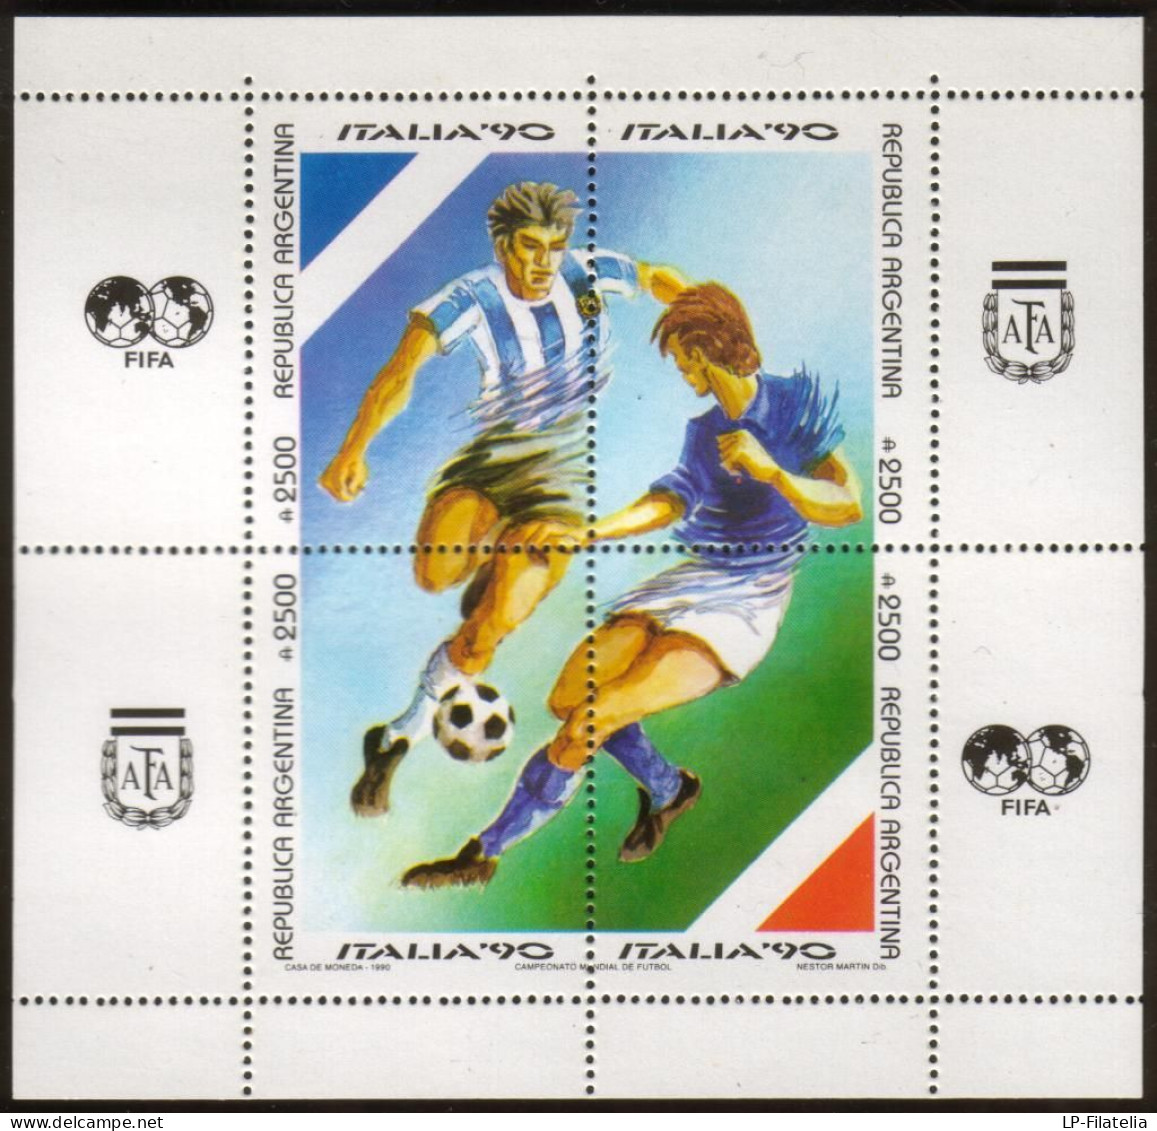 Argentina - 1990 - World Soccer Championship - Italy '90 - Unused Stamps